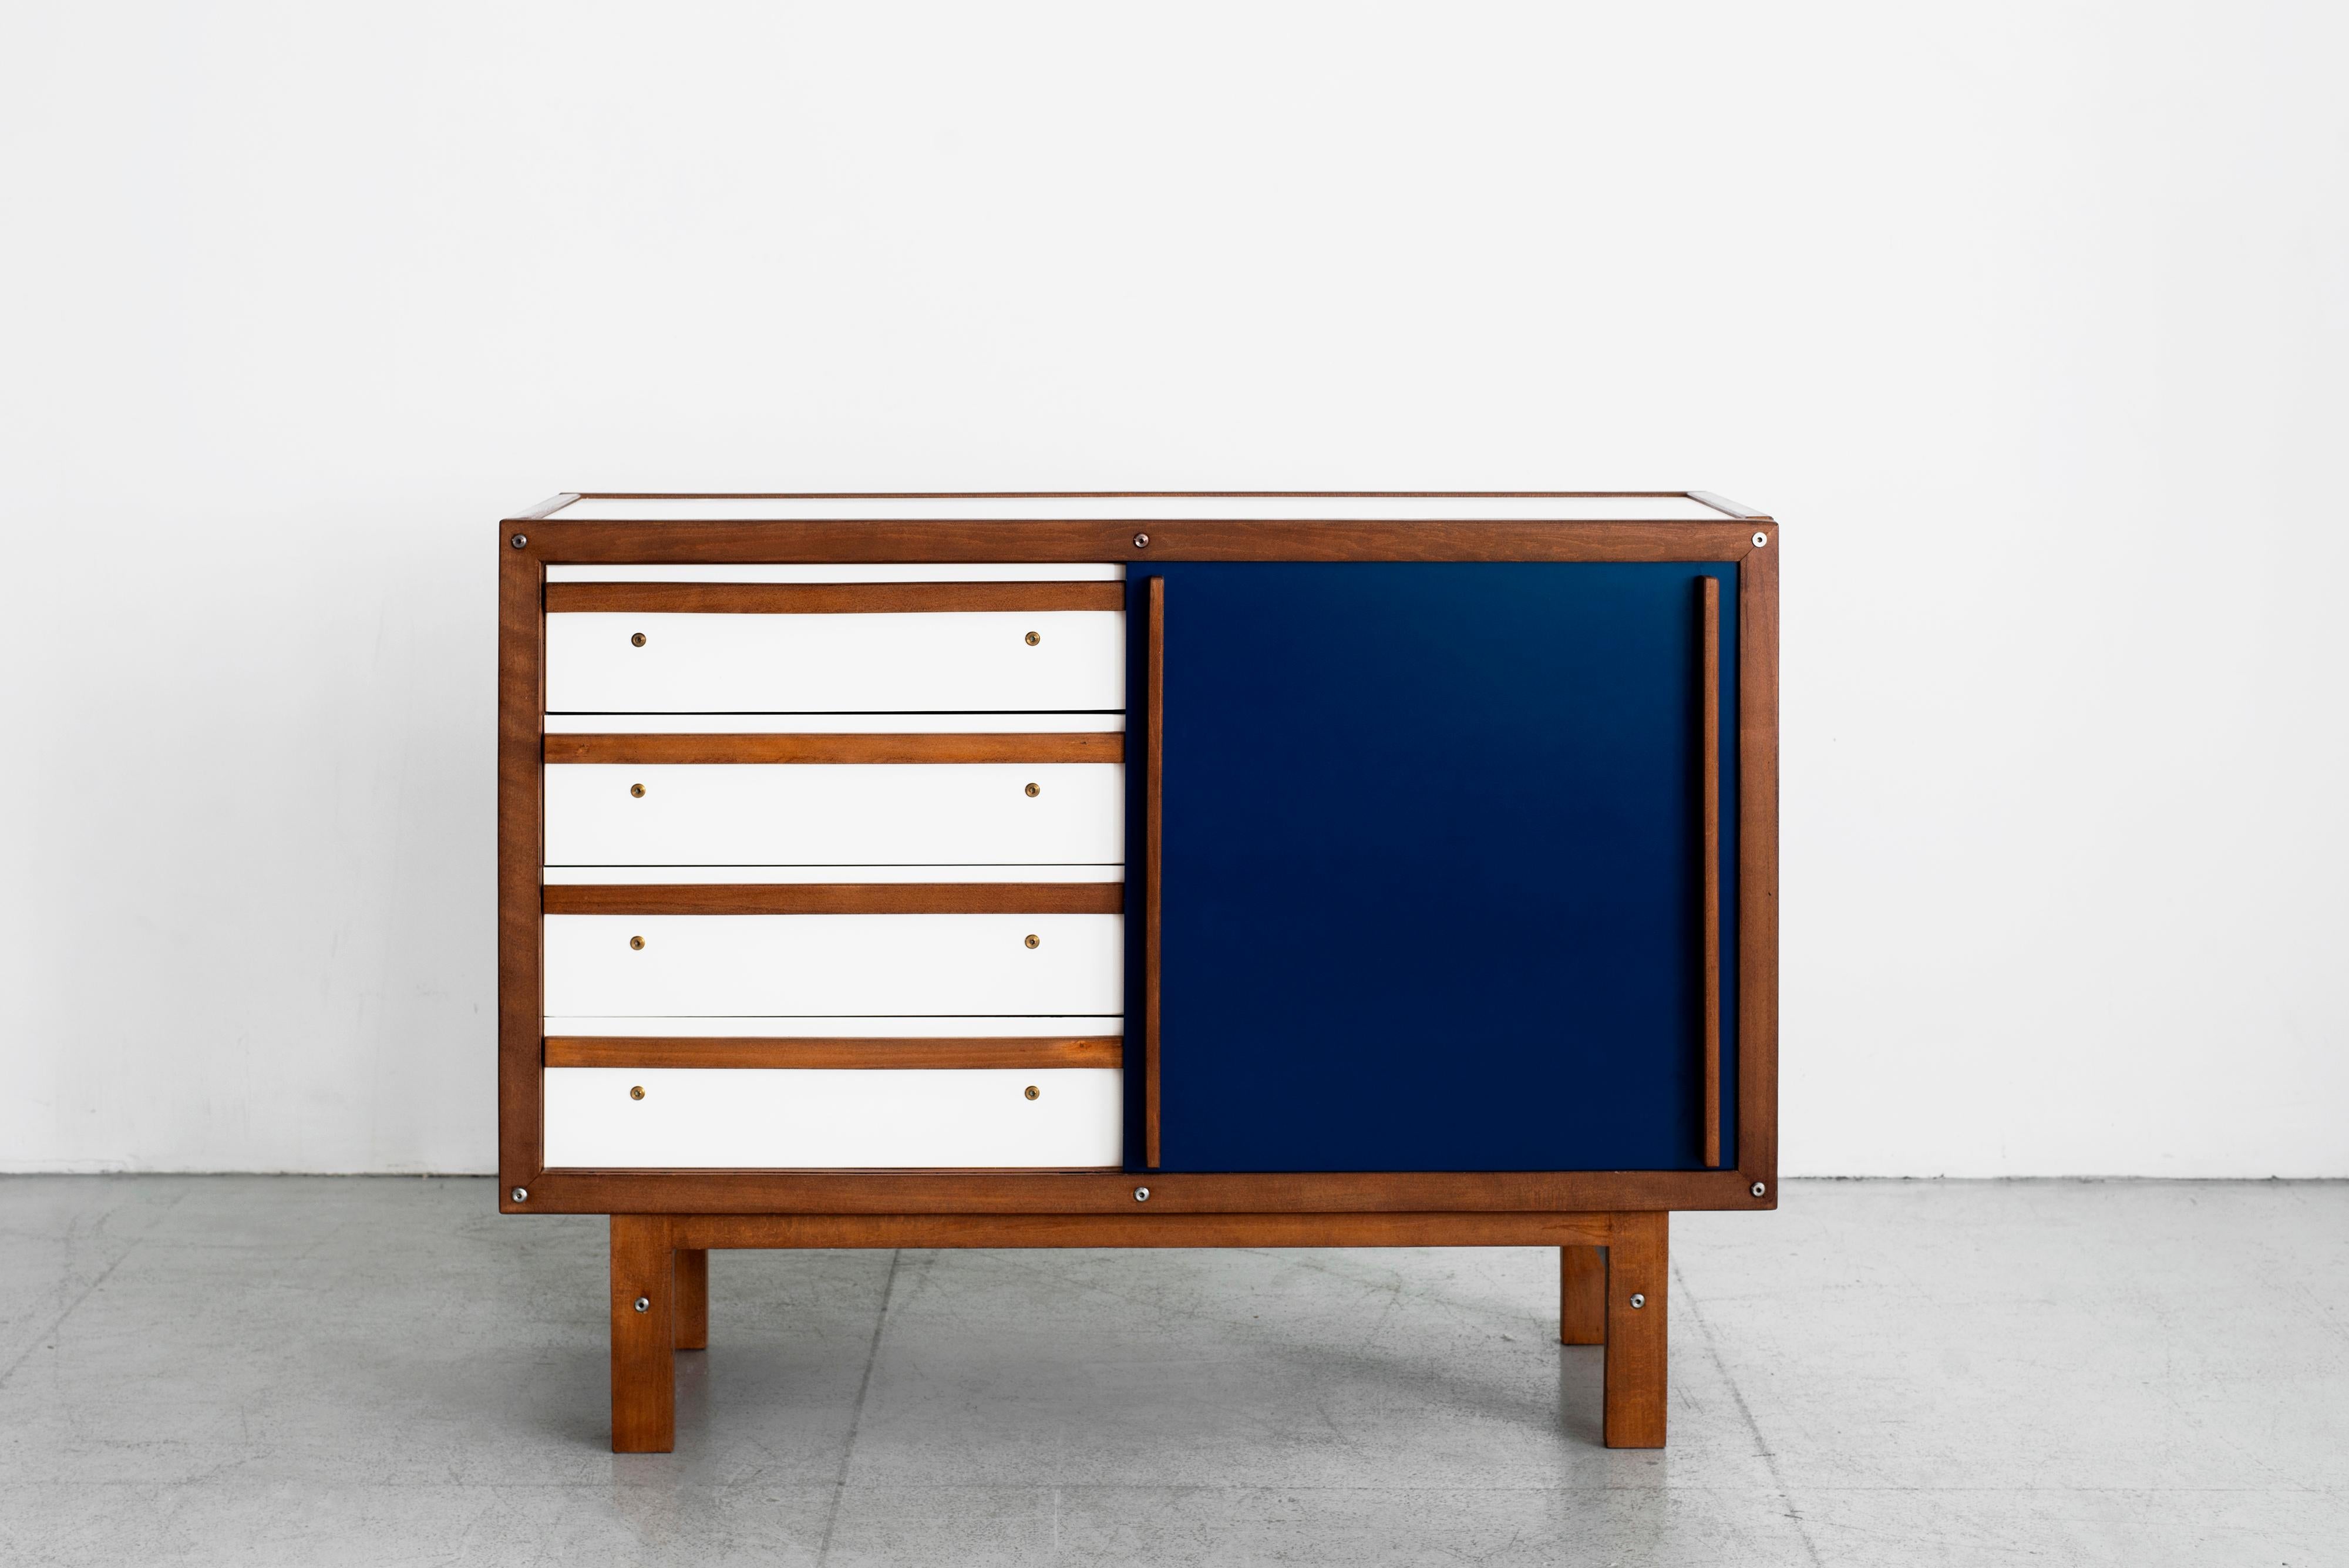 Rare dresser cabinet by French cabinetmaker Andre Sornay. 
Cabinet has four white drawers and one blue sliding door. 
Oak trim throughout and oak handle. 
Sliding door revealing drawers on one side and open shelving on the other.
Black also